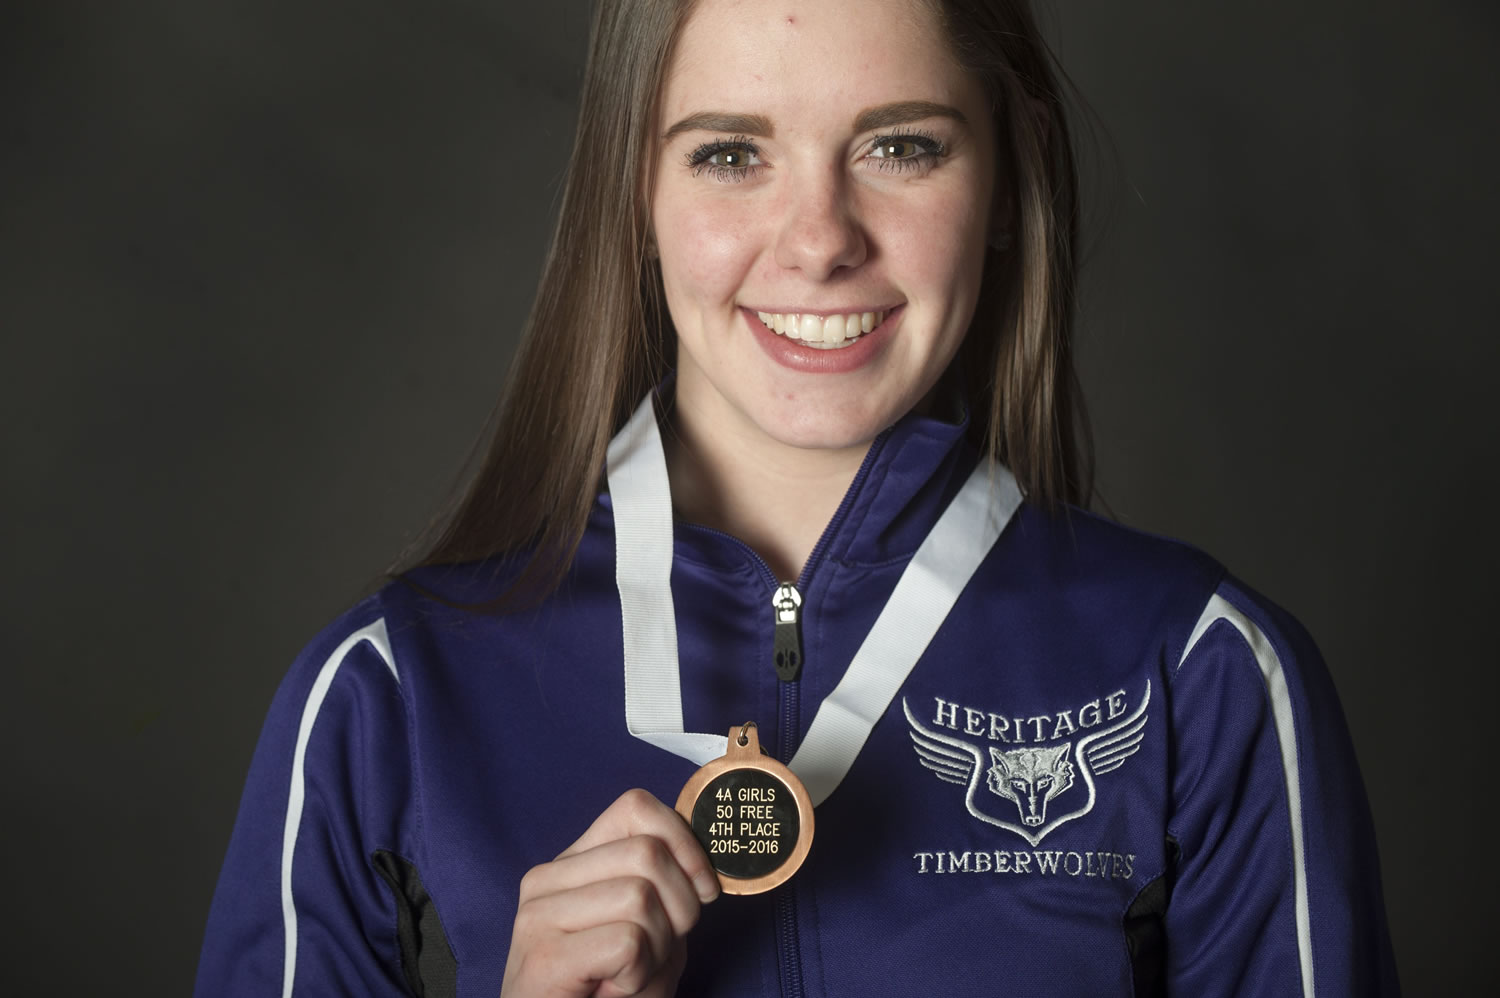 Colleen Woods of Heritage High School, our girls swimmer of the year, shows her medal in Vancouver, Tuesday November 24, 2015.